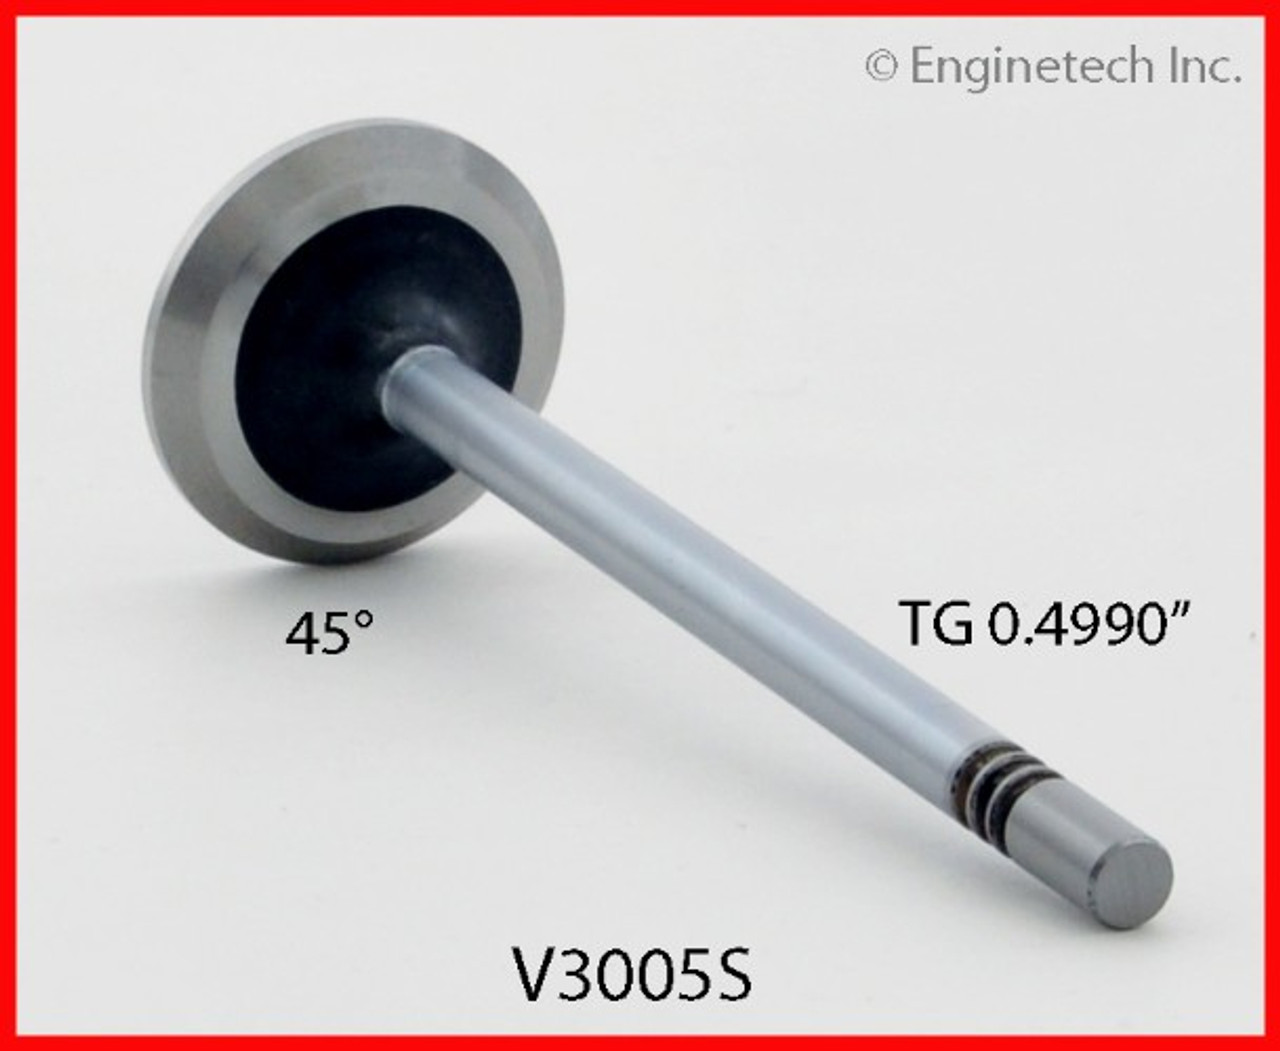 Exhaust Valve - 2004 Ford Expedition 4.6L (V3005S.K157)